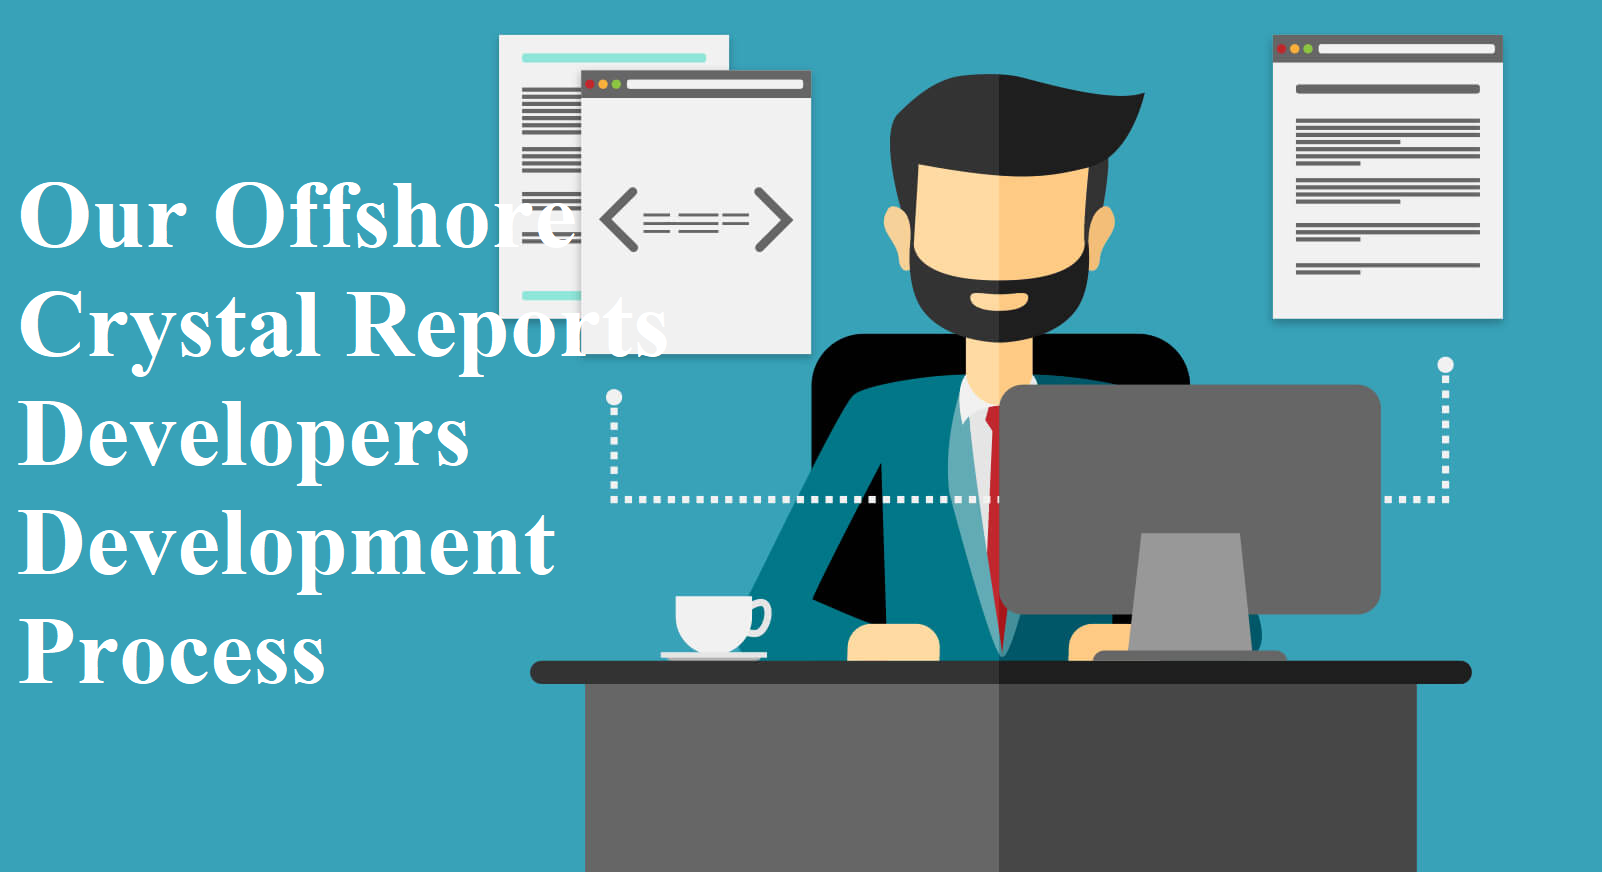 Our Offshore Crystal Reports Developers Development Process